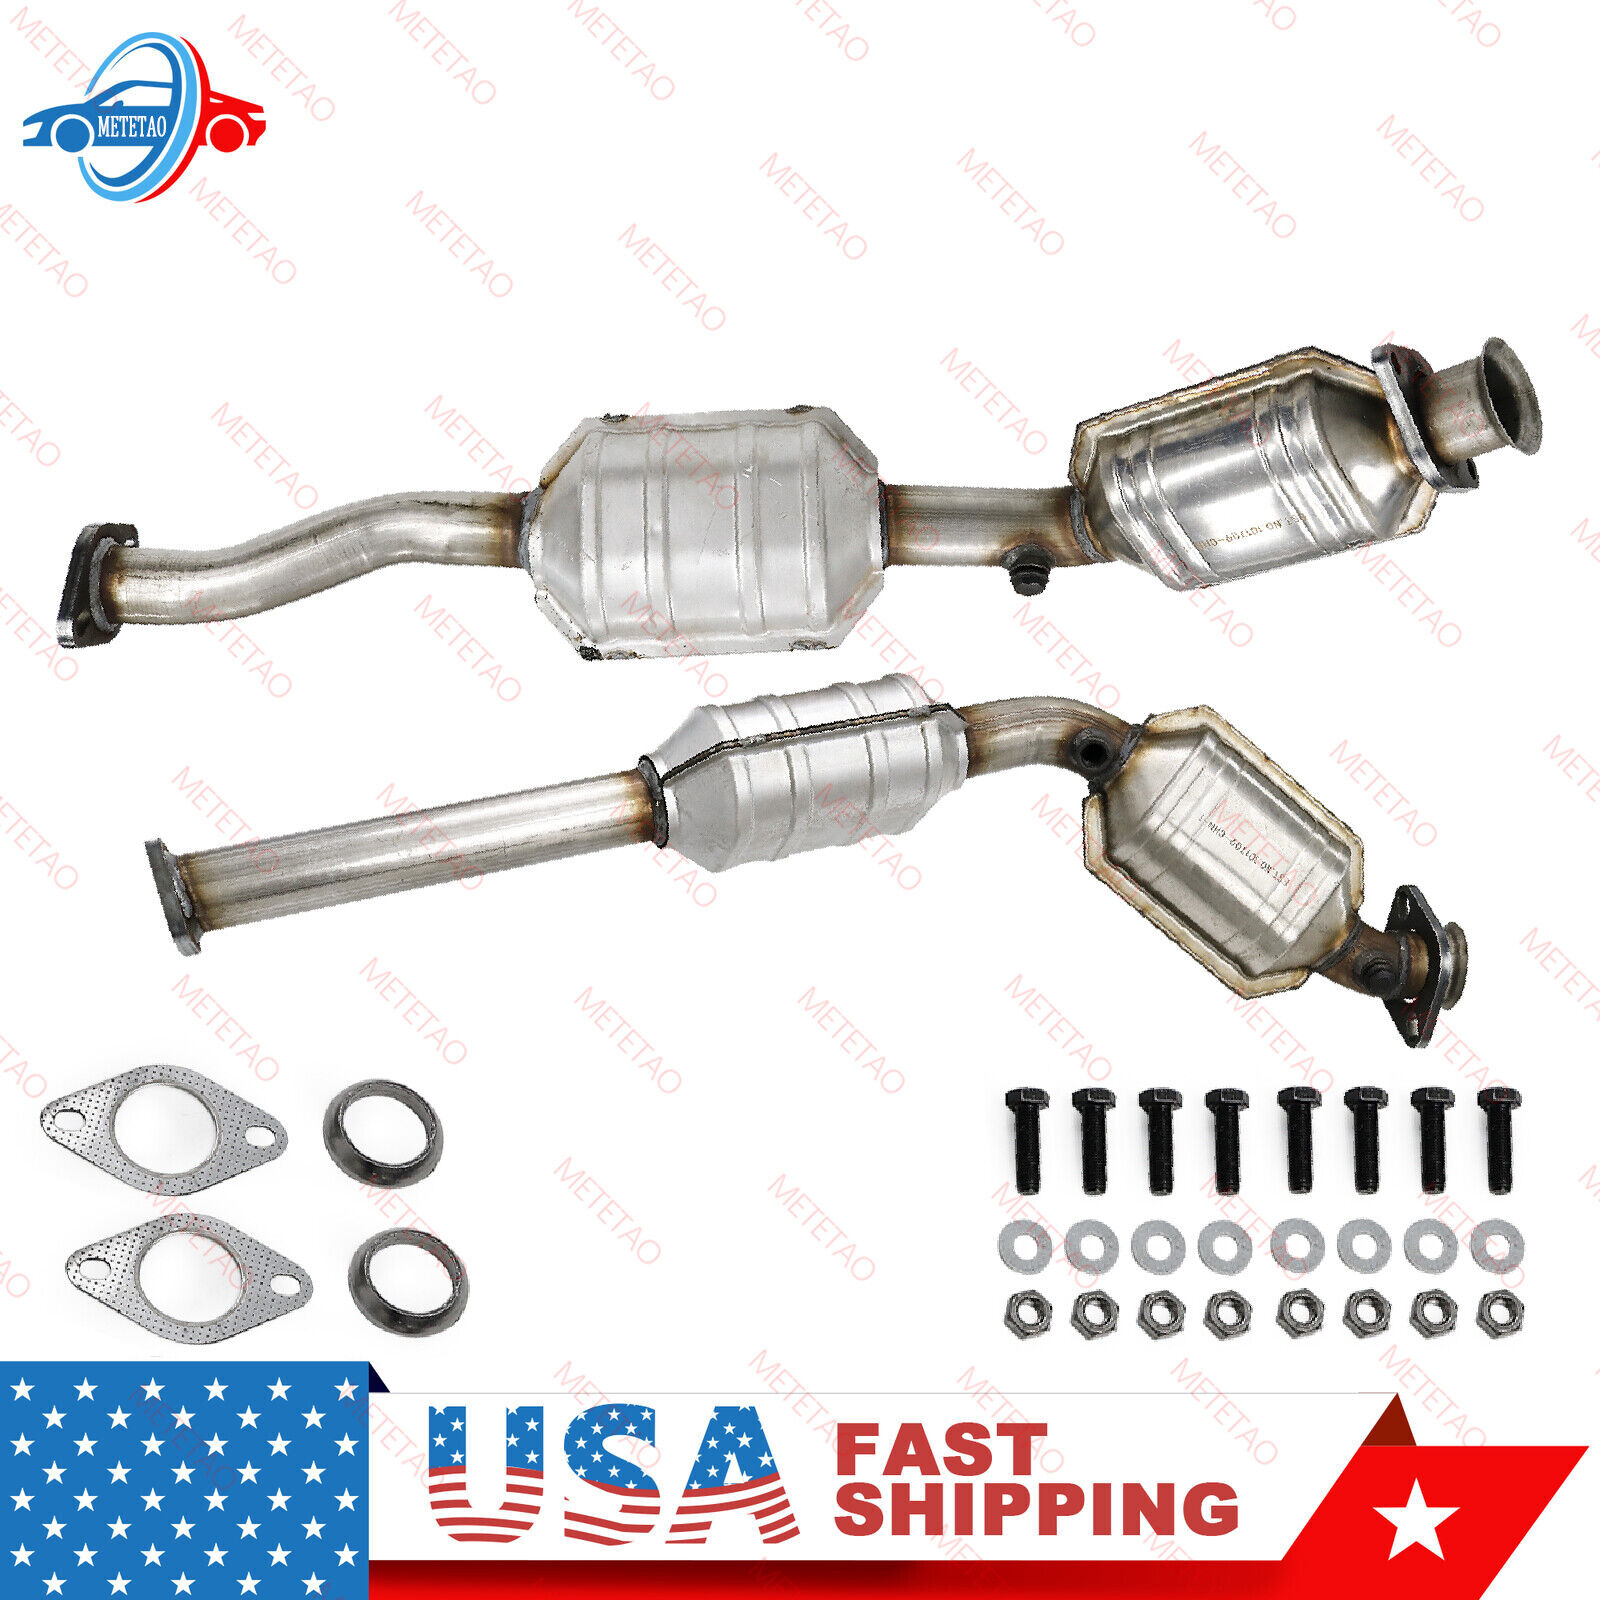 2x Catalytic Converter For Lincoln Town Car 4.6L V8 2003-2011 Federal EPA